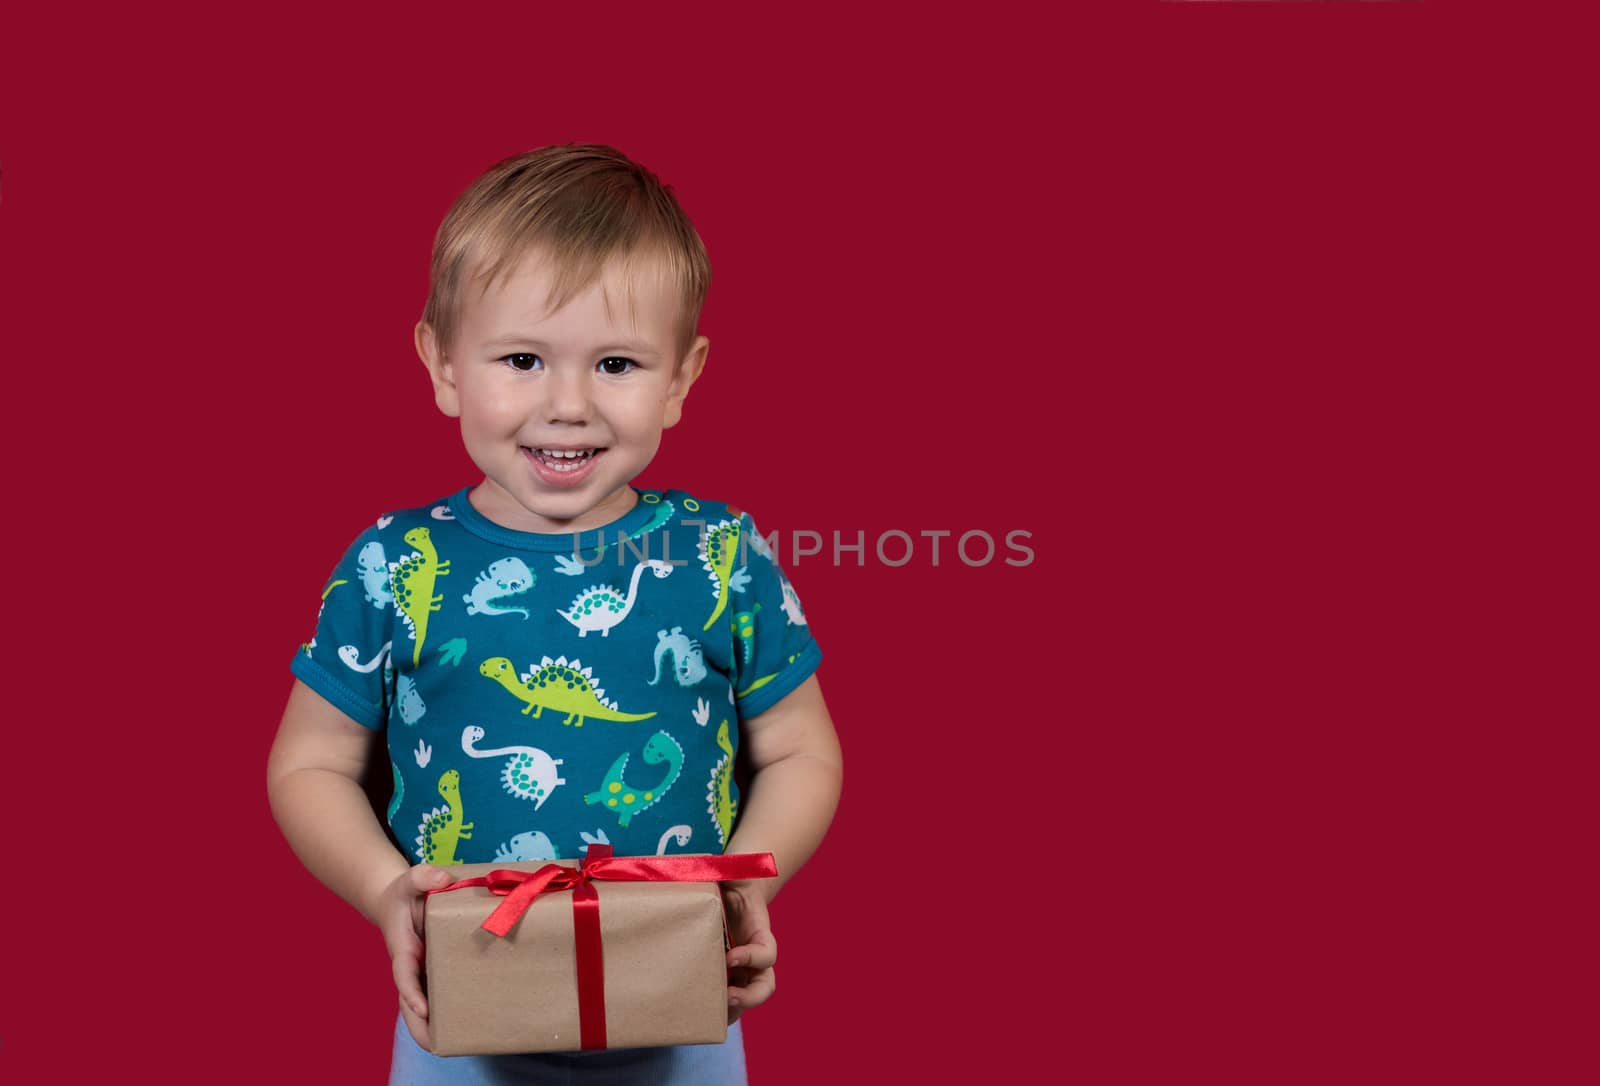 A little boy tries to unpack a New Year's gift smiling on a red background by galinasharapova